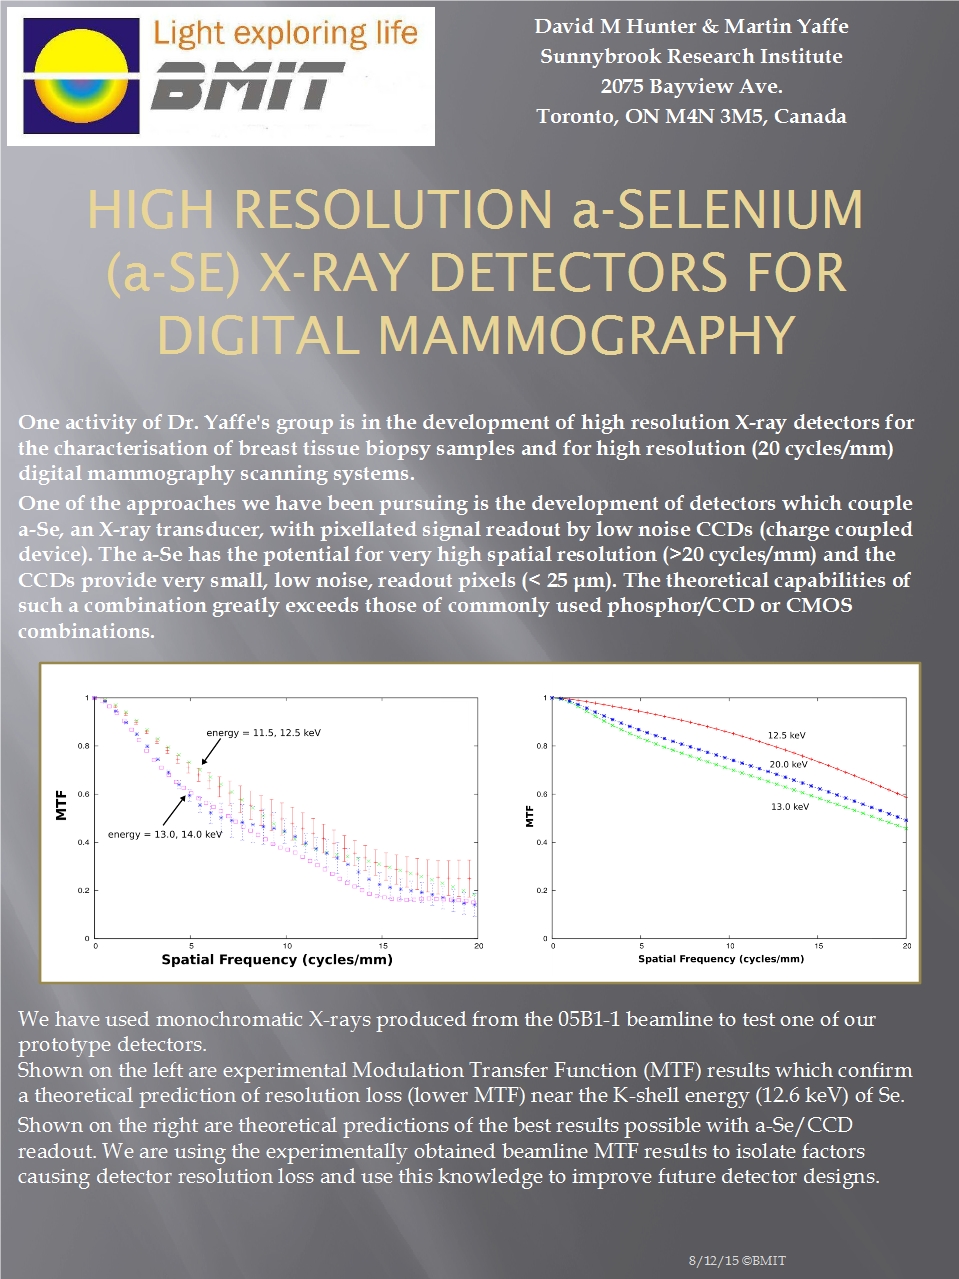 High Resolution a-Selenium (a-Se) X-Ray Detectors for Digital Mammography Image